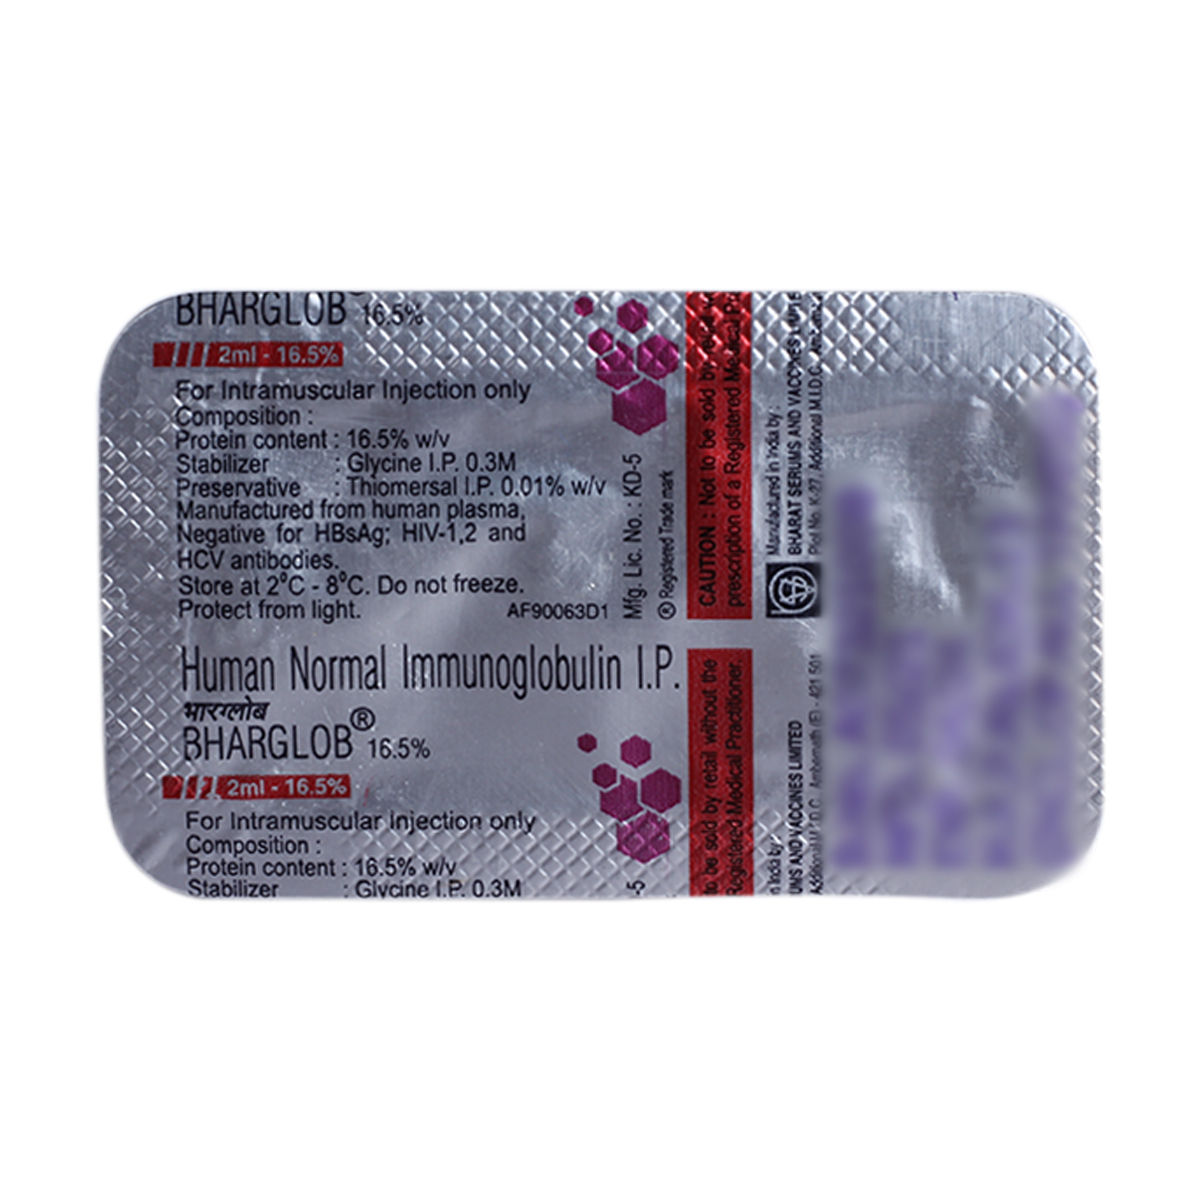 Buy Bharglob 16.5% Injection 1's Online